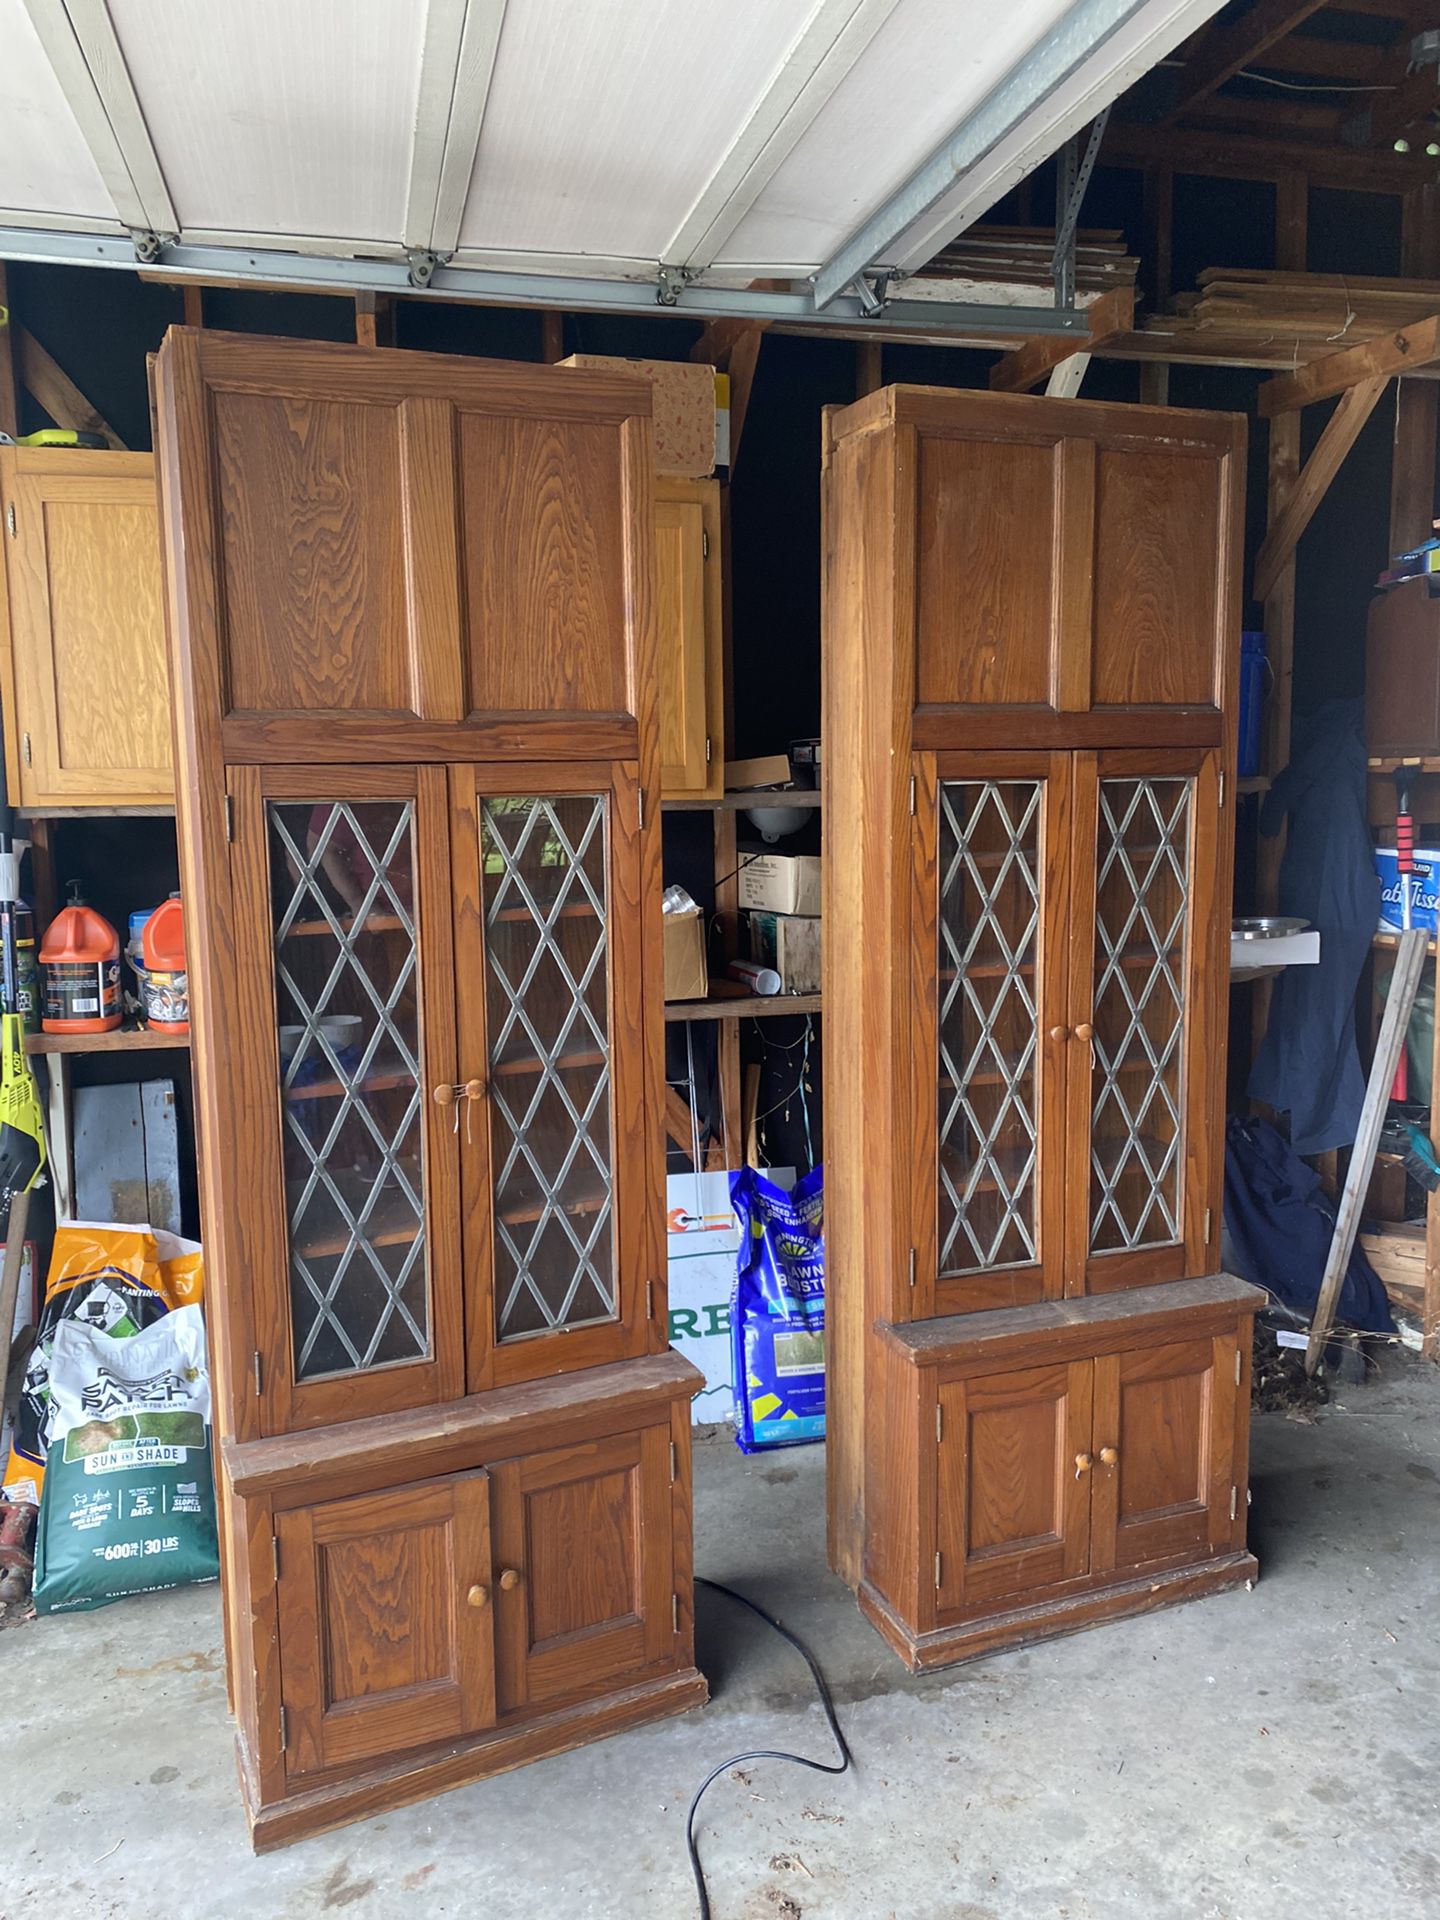 2 Antique Cabinets, Leaded Glass Doors